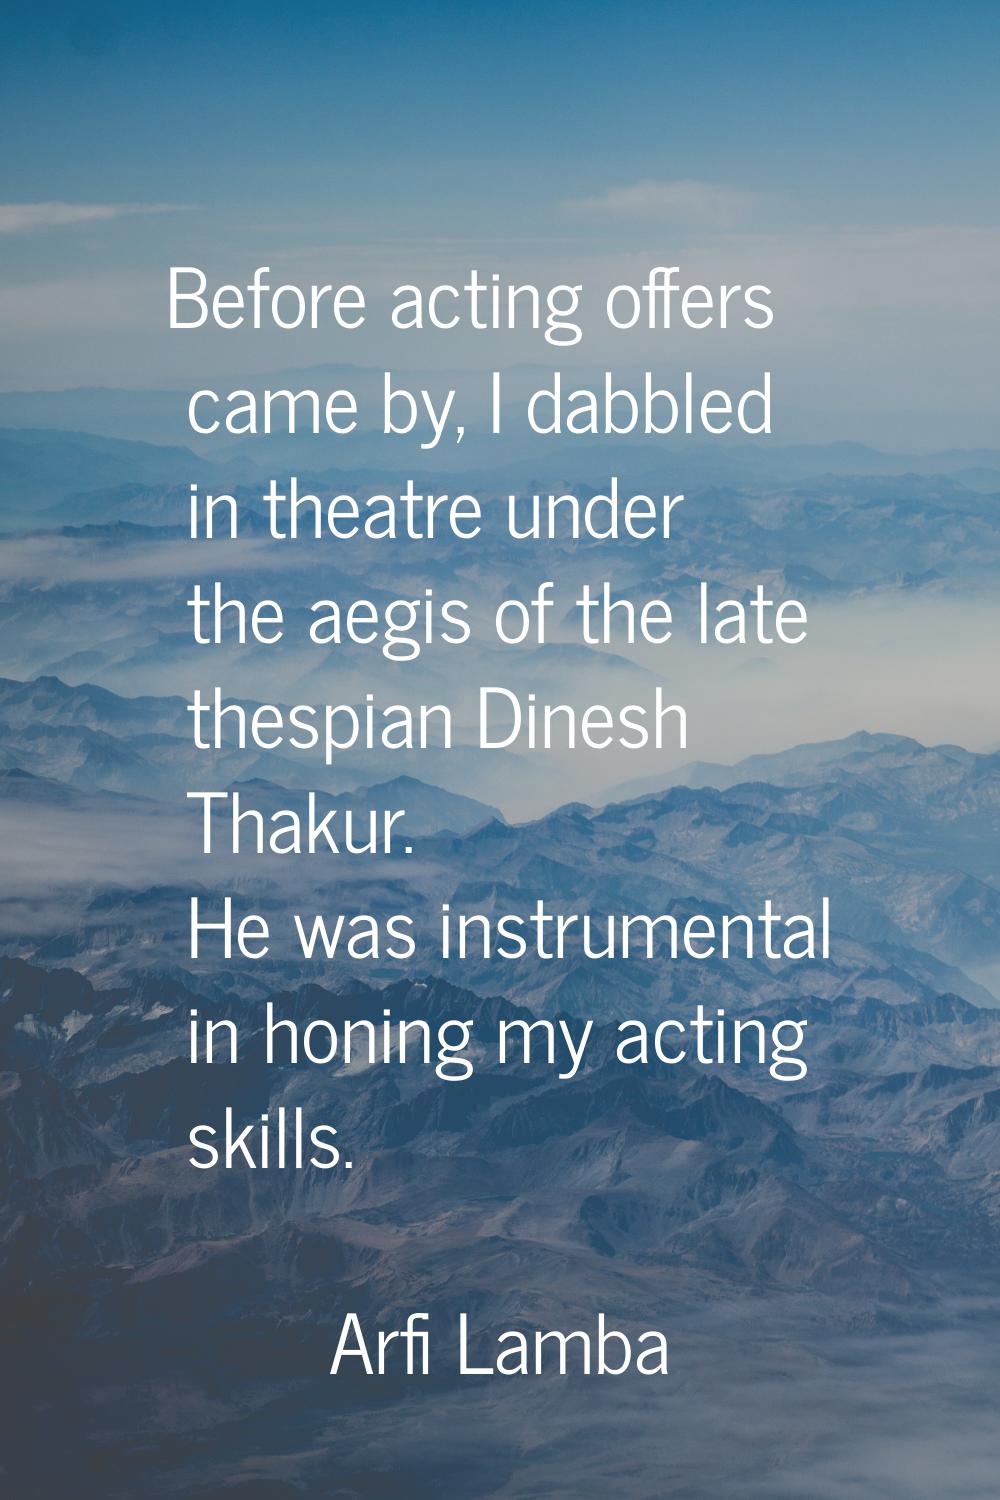 Before acting offers came by, I dabbled in theatre under the aegis of the late thespian Dinesh Thak